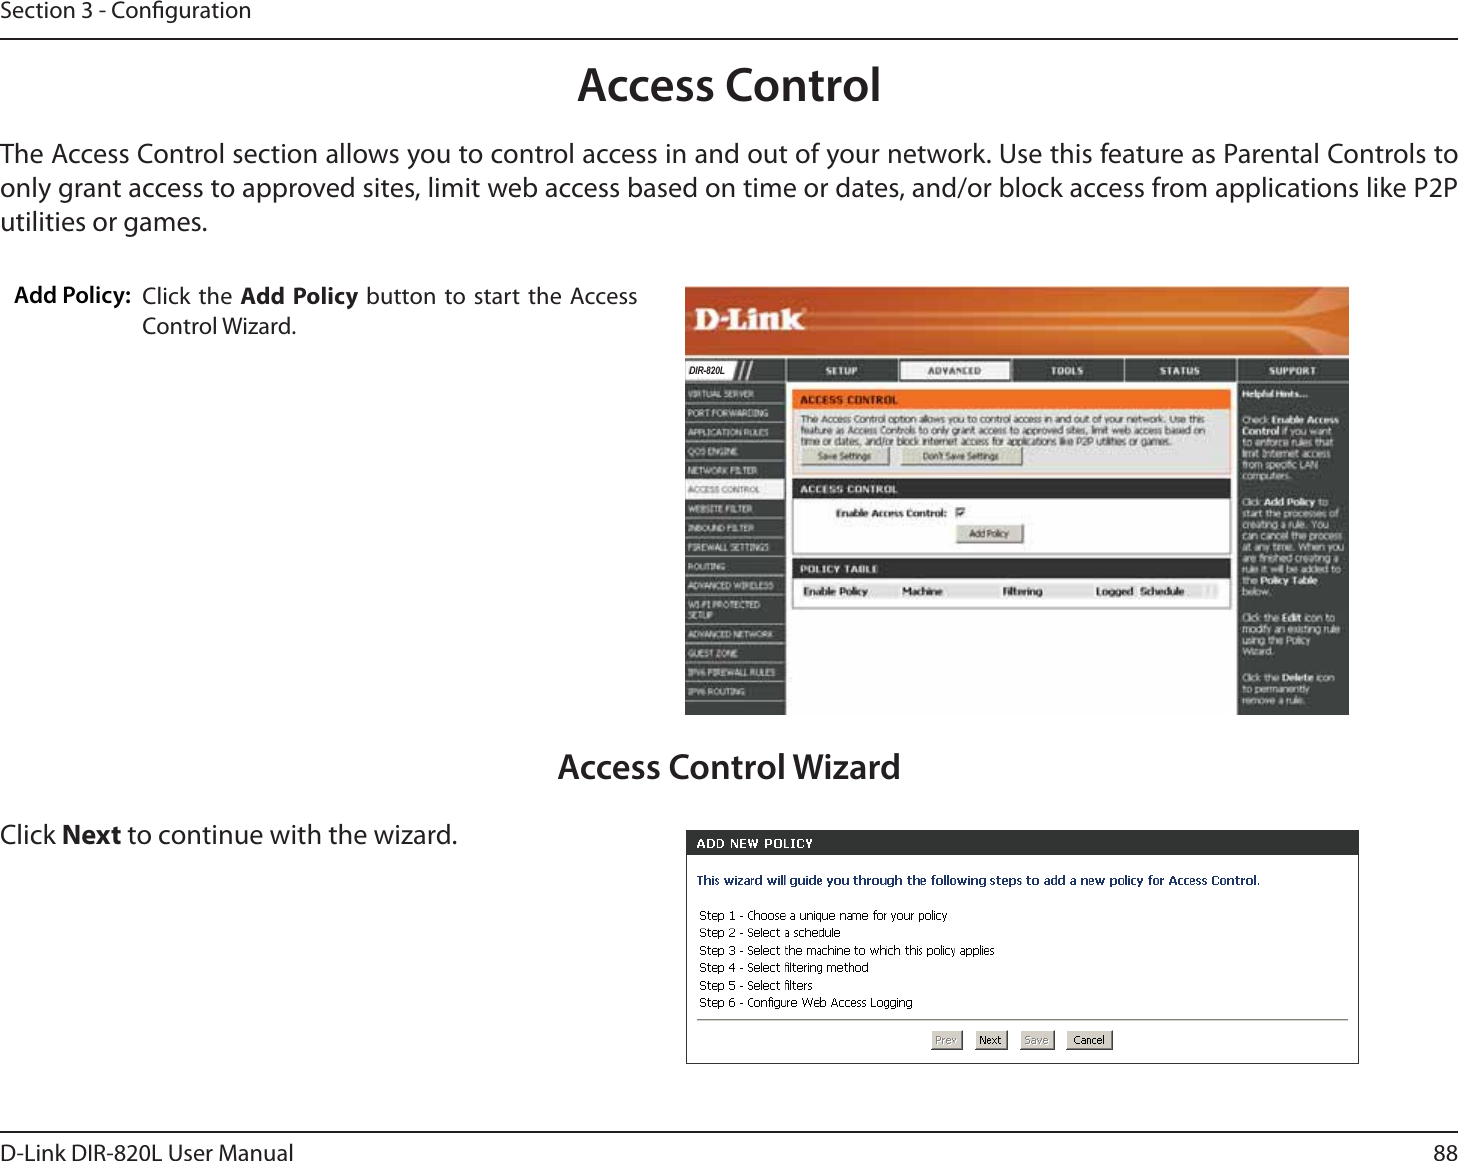 88D-Link DIR-820L User ManualSection 3 - CongurationAccess ControlClick the Add Policy button to start the Access Control Wizard. Add Policy:The Access Control section allows you to control access in and out of your network. Use this feature as Parental Controls to only grant access to approved sites, limit web access based on time or dates, and/or block access from applications like P2P utilities or games.Click Next to continue with the wizard.Access Control Wizard&apos;,5/